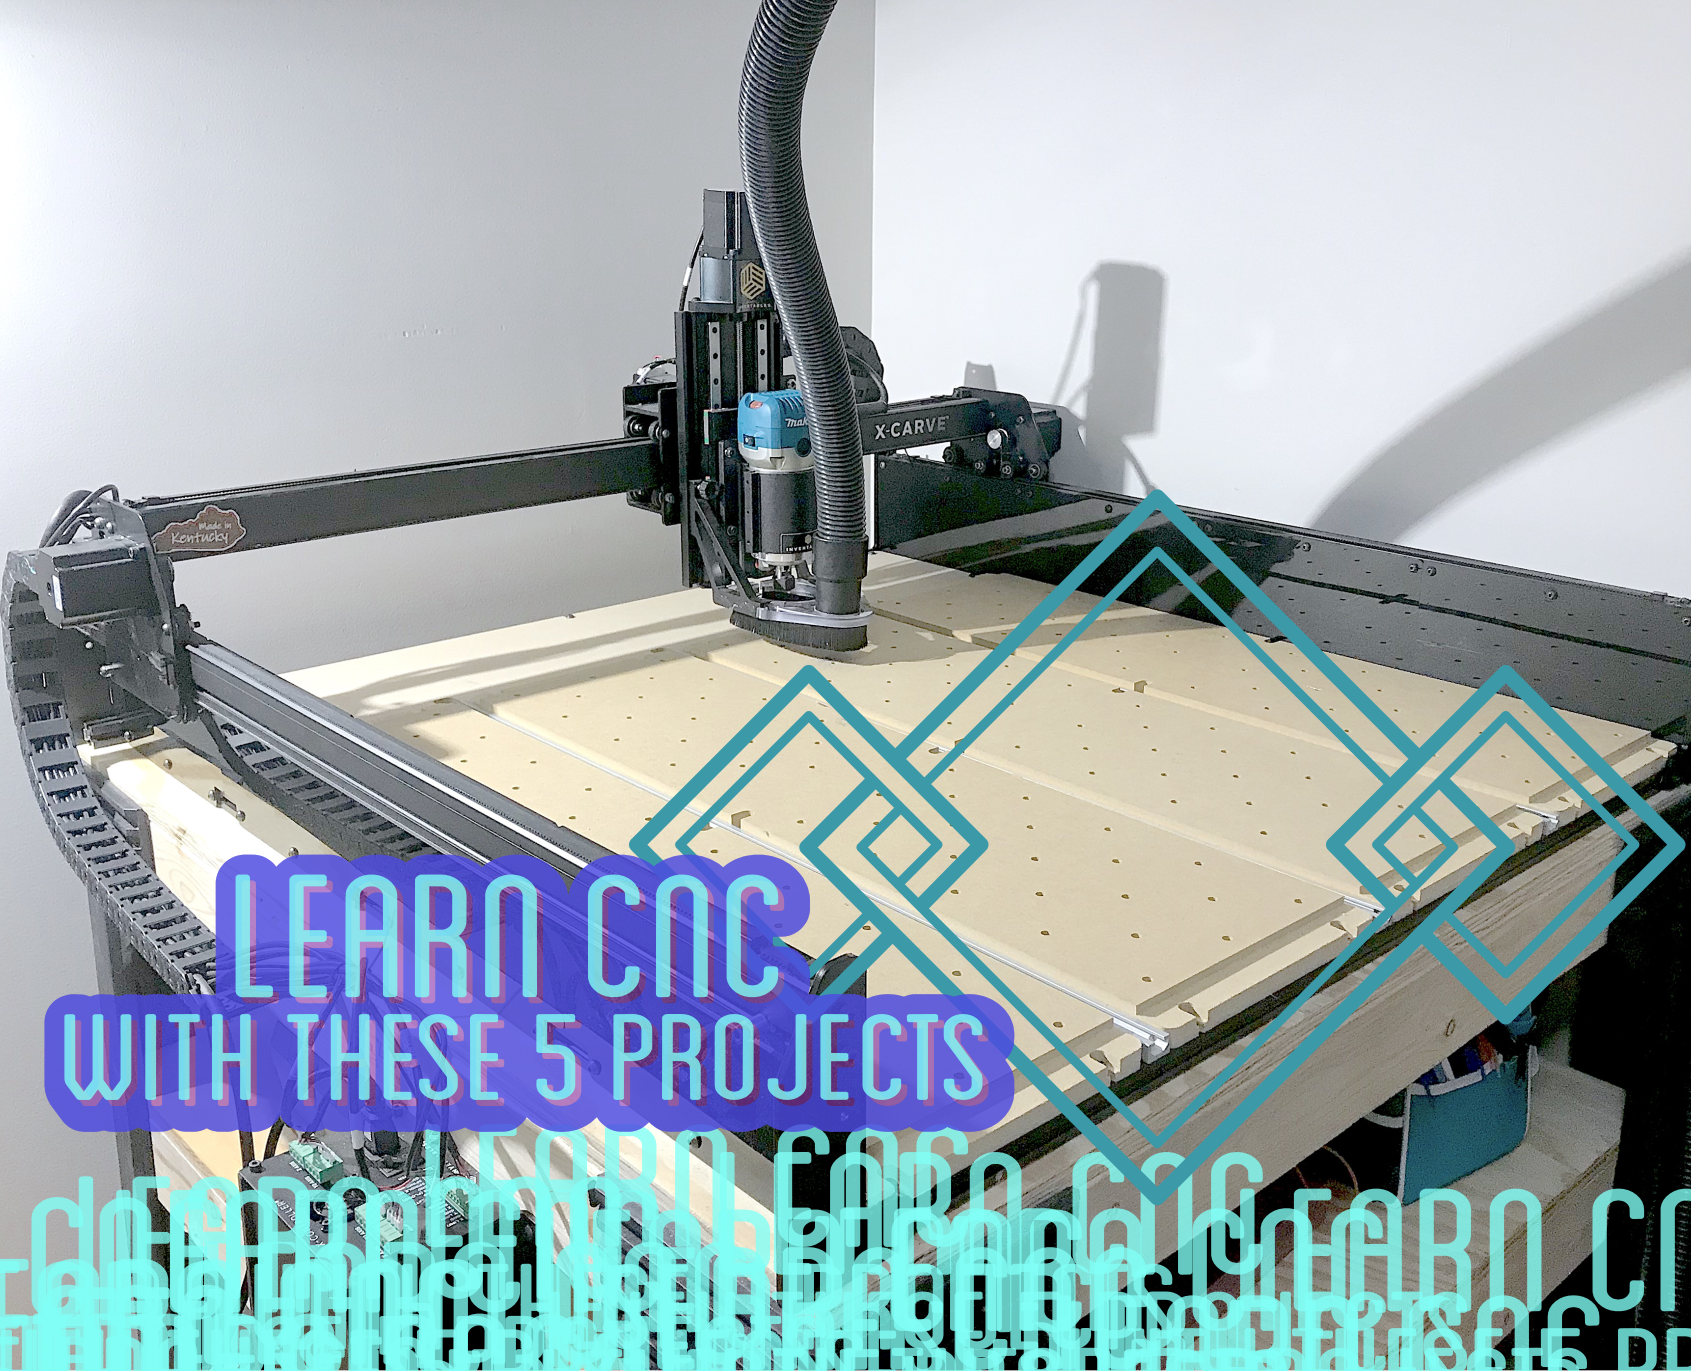 Learn CNC With These 5 Projects: for CNC Routing, 3D Printing, Laser & Vinyl Cutting